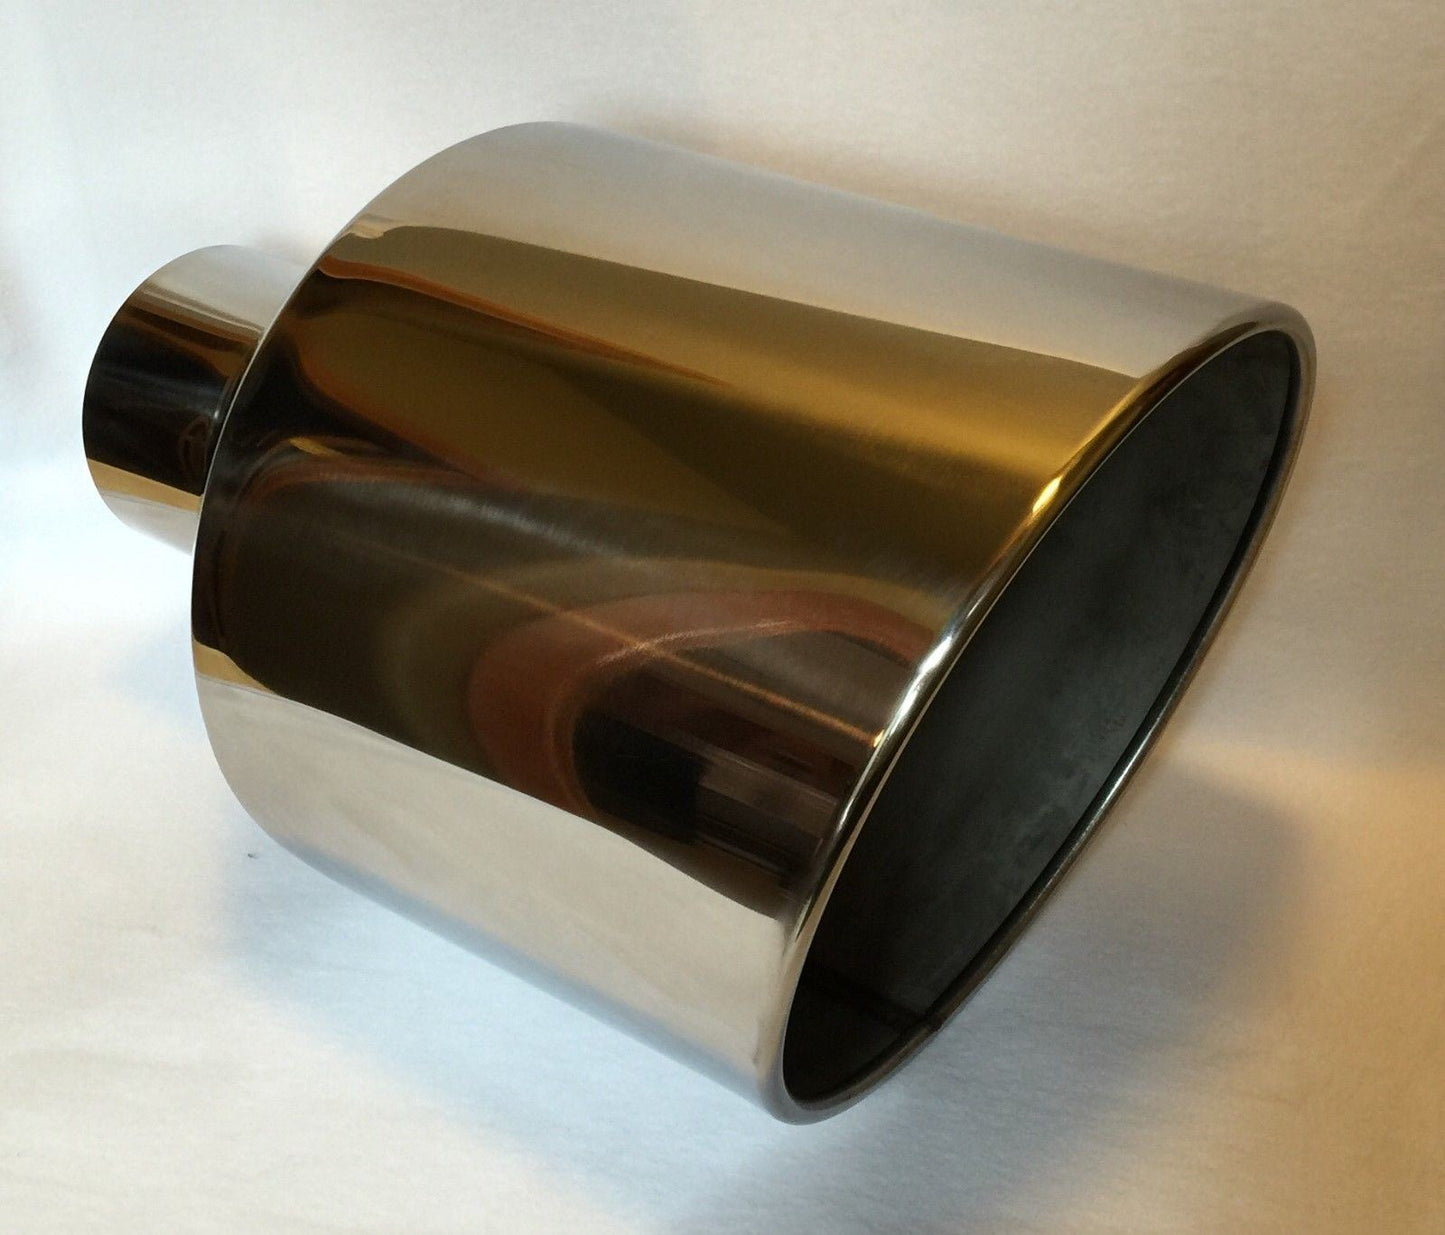 CHEVY DURAMAX 6.6L 4" IN x 12" OUT x 18" LONG POLISHED STAINLESS EXHAUST TIP